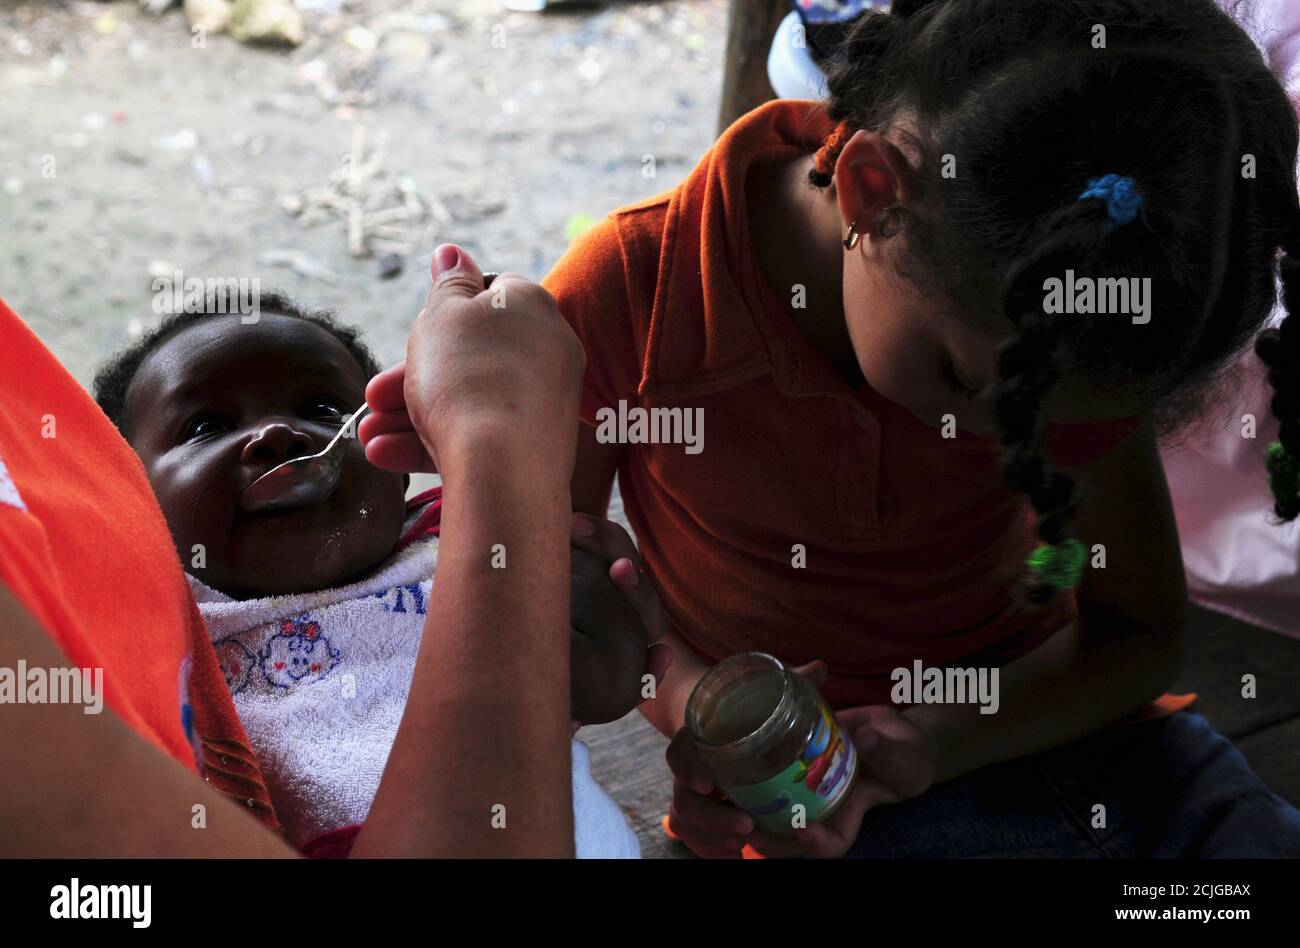 A Haitian Dominican baby is fed by neighbours in El Arenoso in Tamboril April 28, 2012. Cholera cases have been rising in the Dominican Republic, the Health Ministry said. 523 cases have been reported in hospitals and 7 have died, in the district of Tamboril.  REUTERS/Ricardo Rojas (DOMINICAN REPUBLIC - Tags: HEALTH) Stock Photo